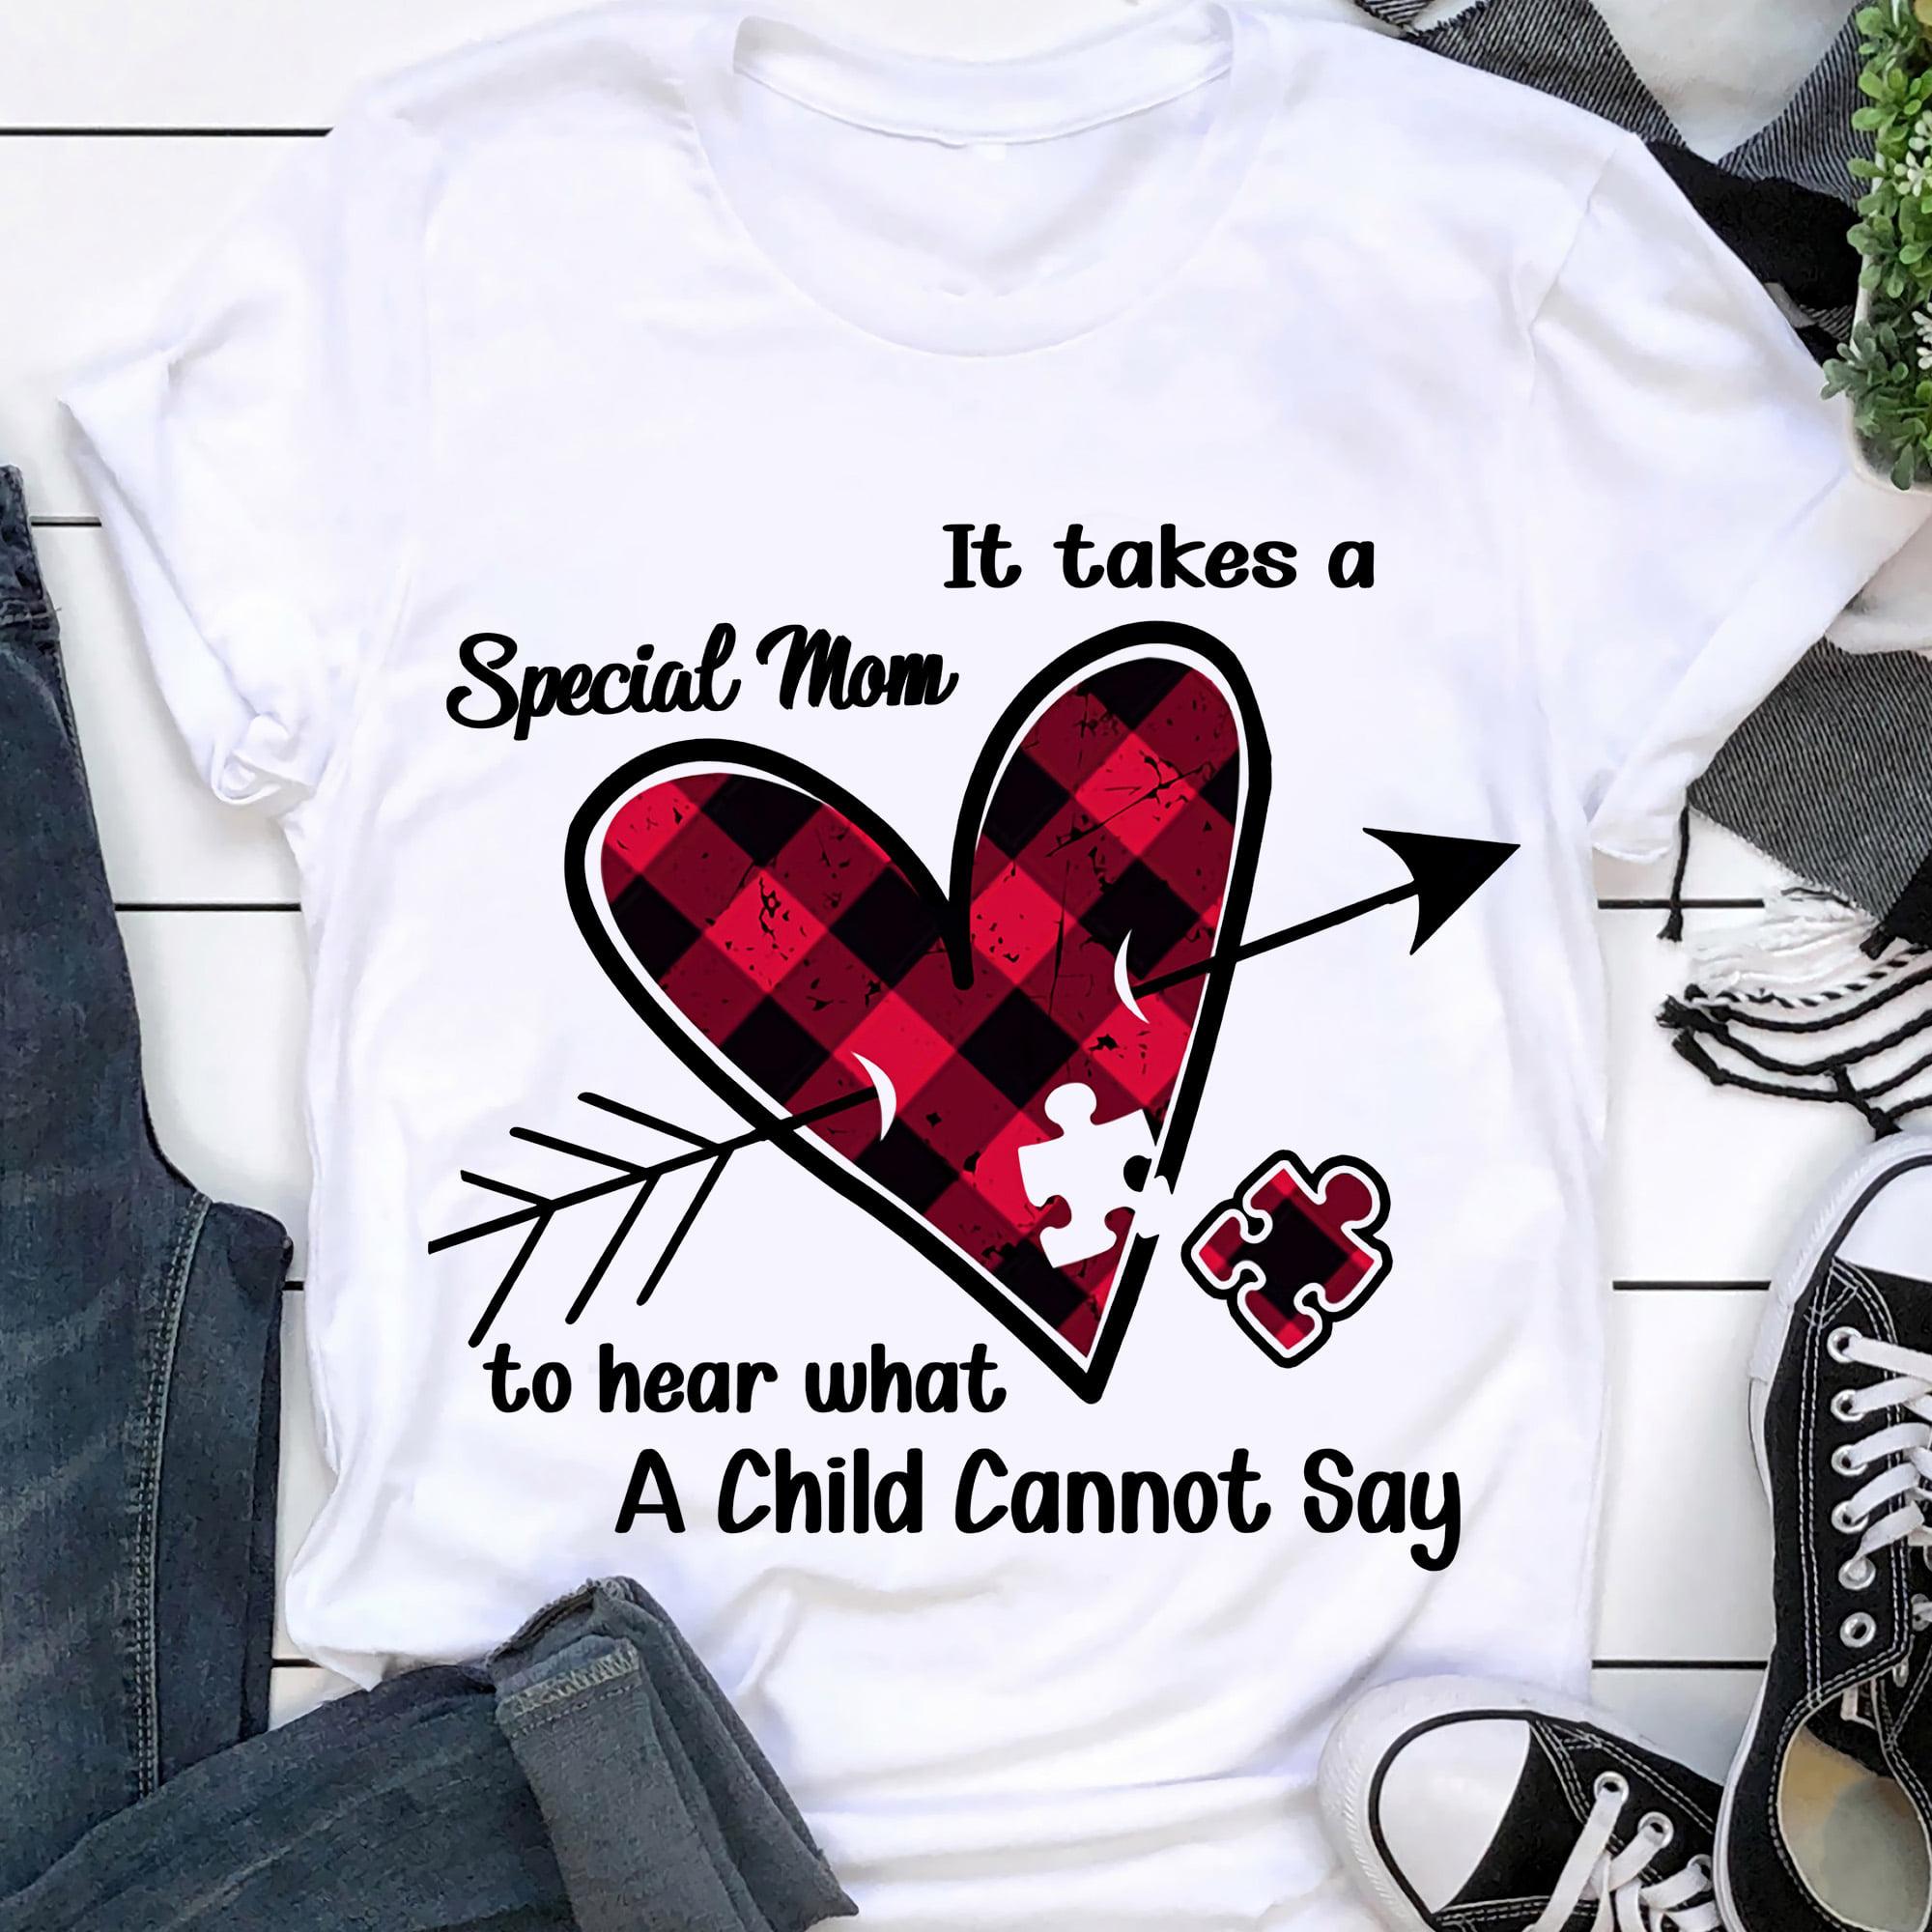 Autism Symbol Heart - It takes a special mom to hear what a child cannot say